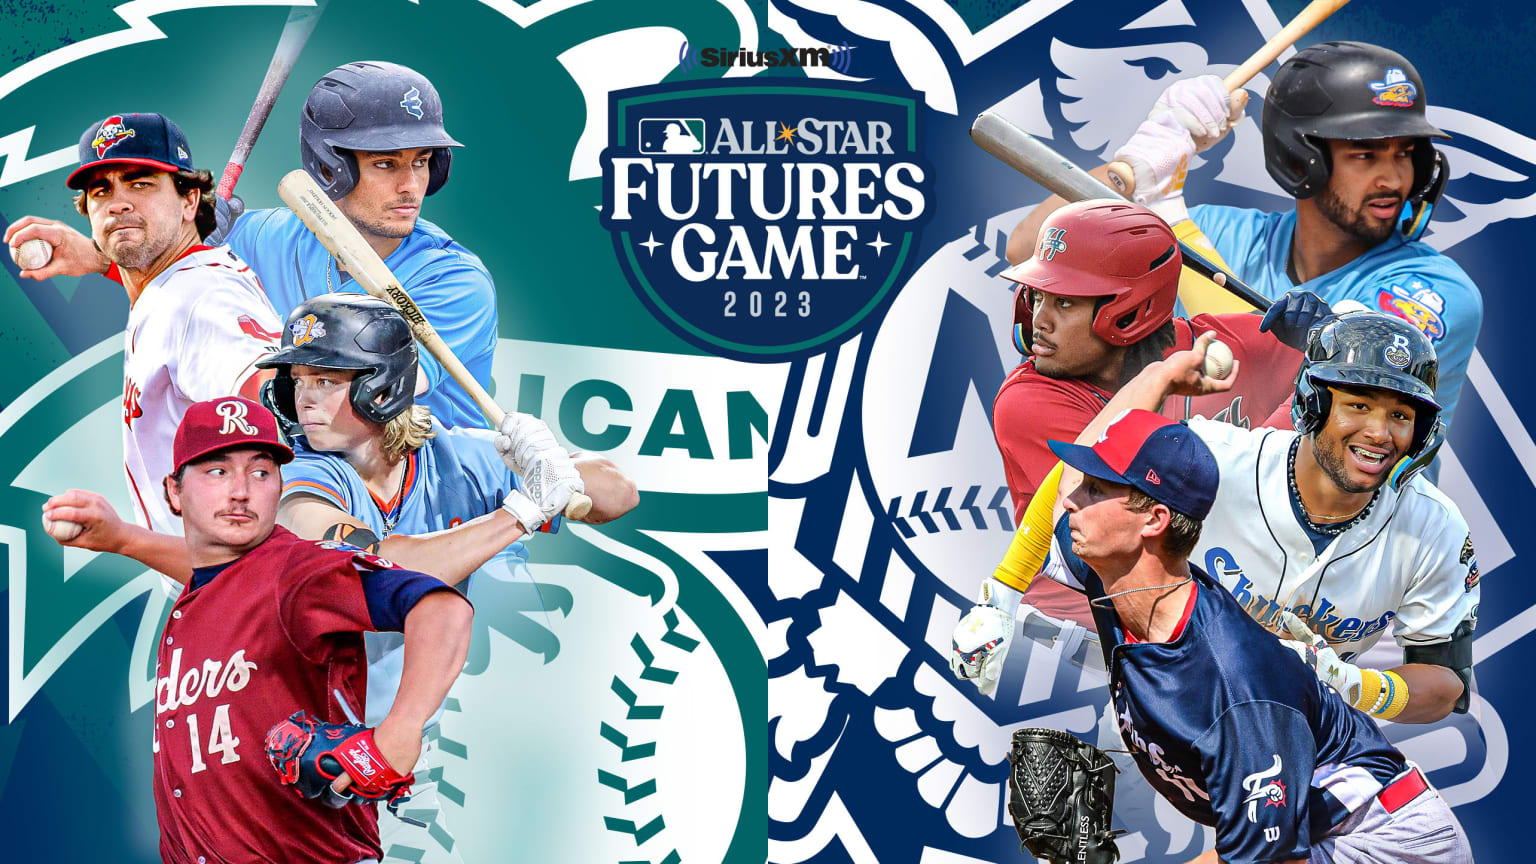 A photo illustration of 8 prospects flanking the 2023 Futures Game logo